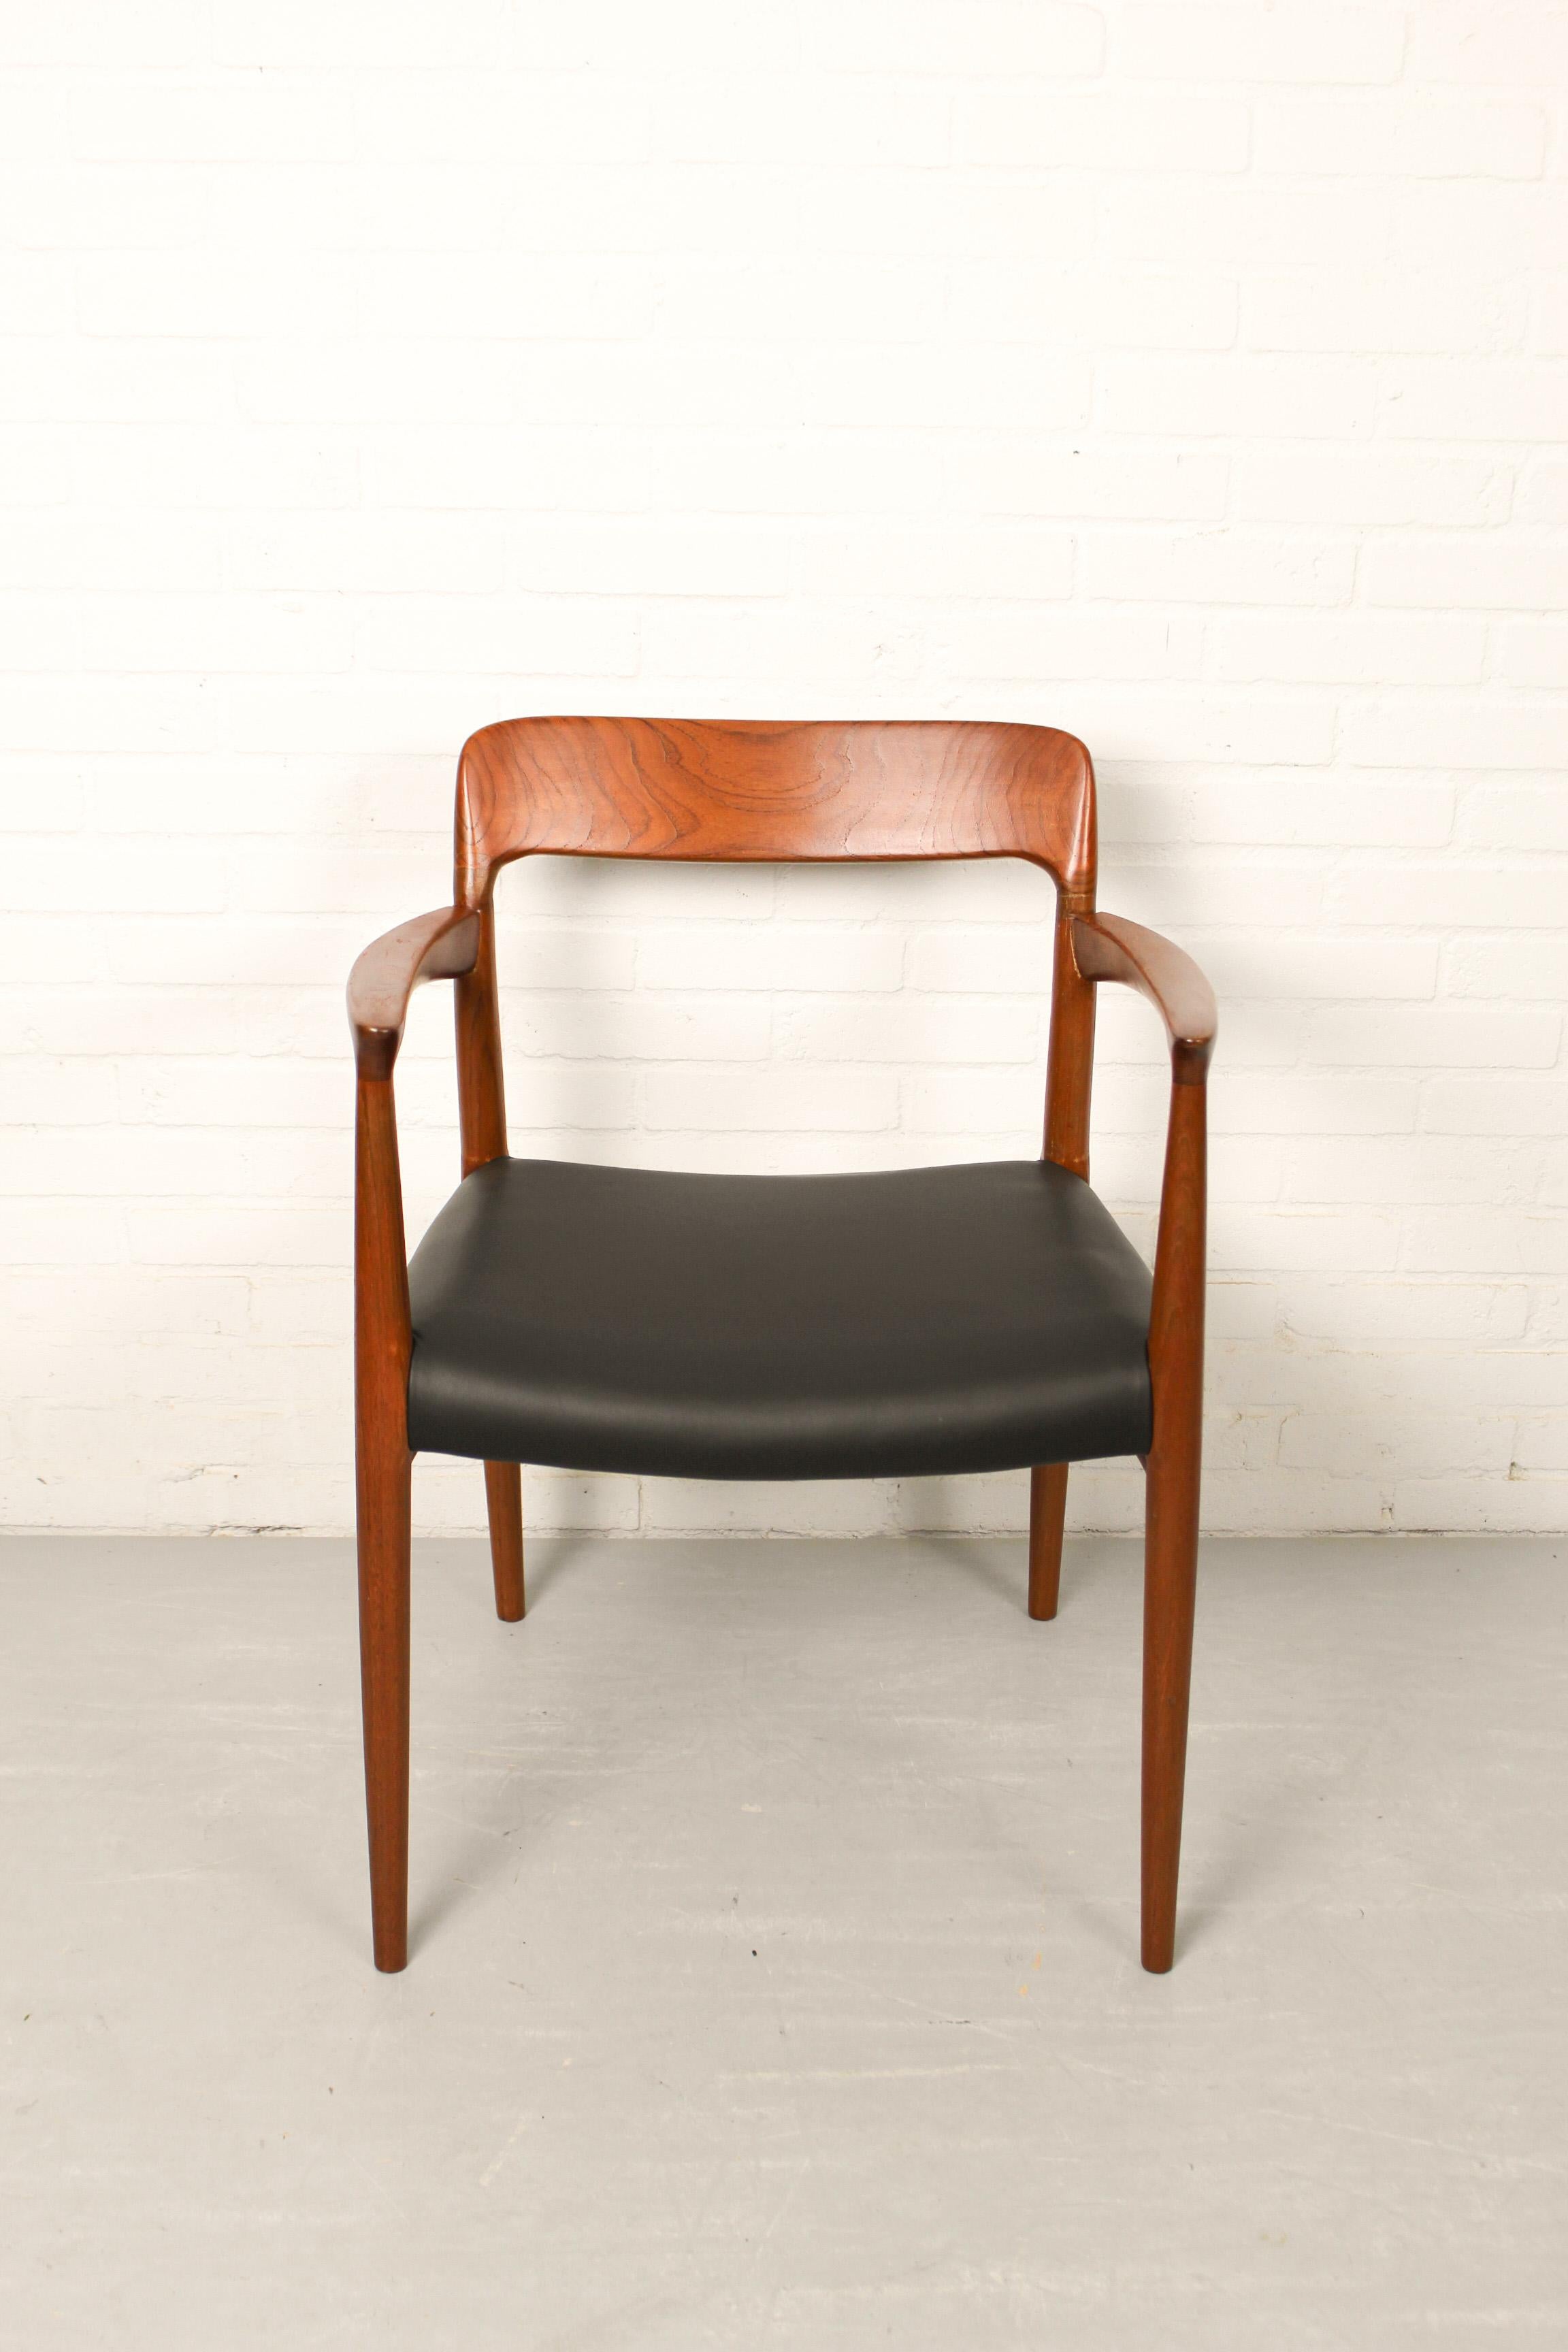 Model 65 Dining Chair in Teak and Leather by Niels Otto Møller For Sale 3